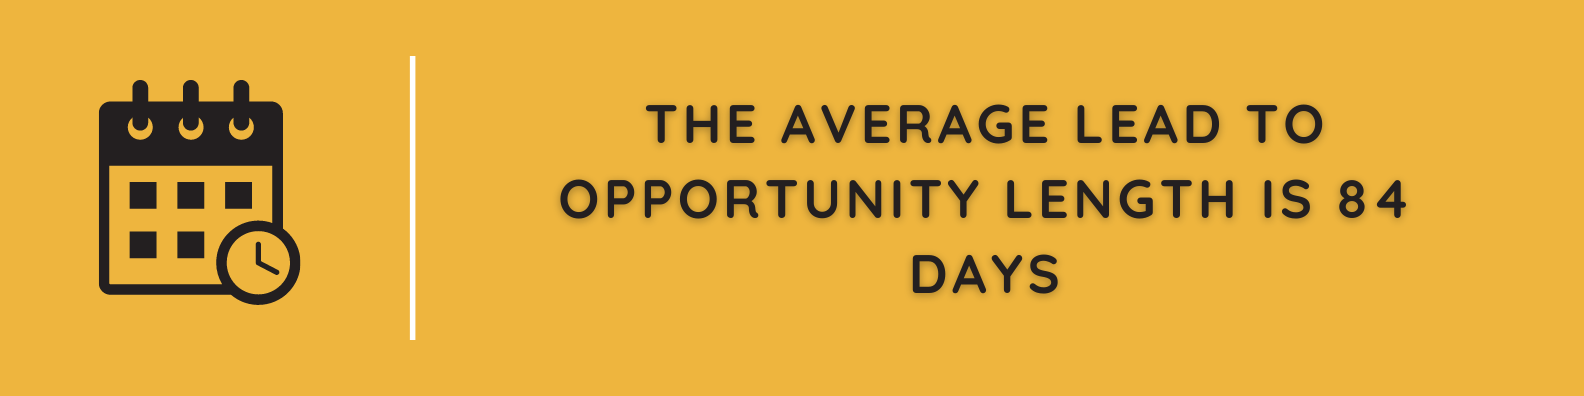 Average Lead Opportunity Length